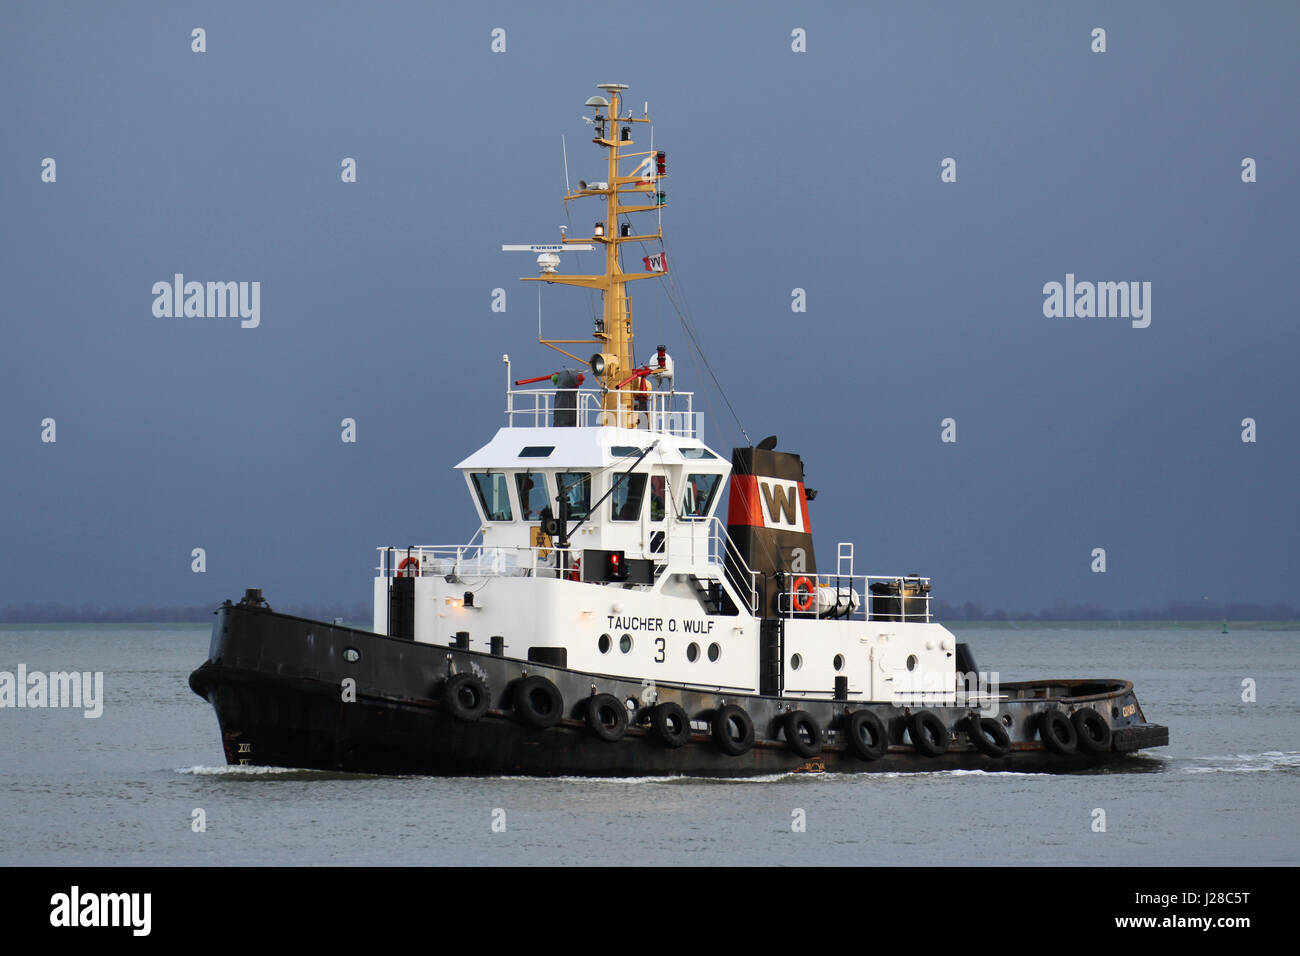 tugboat TAUCHER O. WULF 3 on the river Elbe Stock Photo